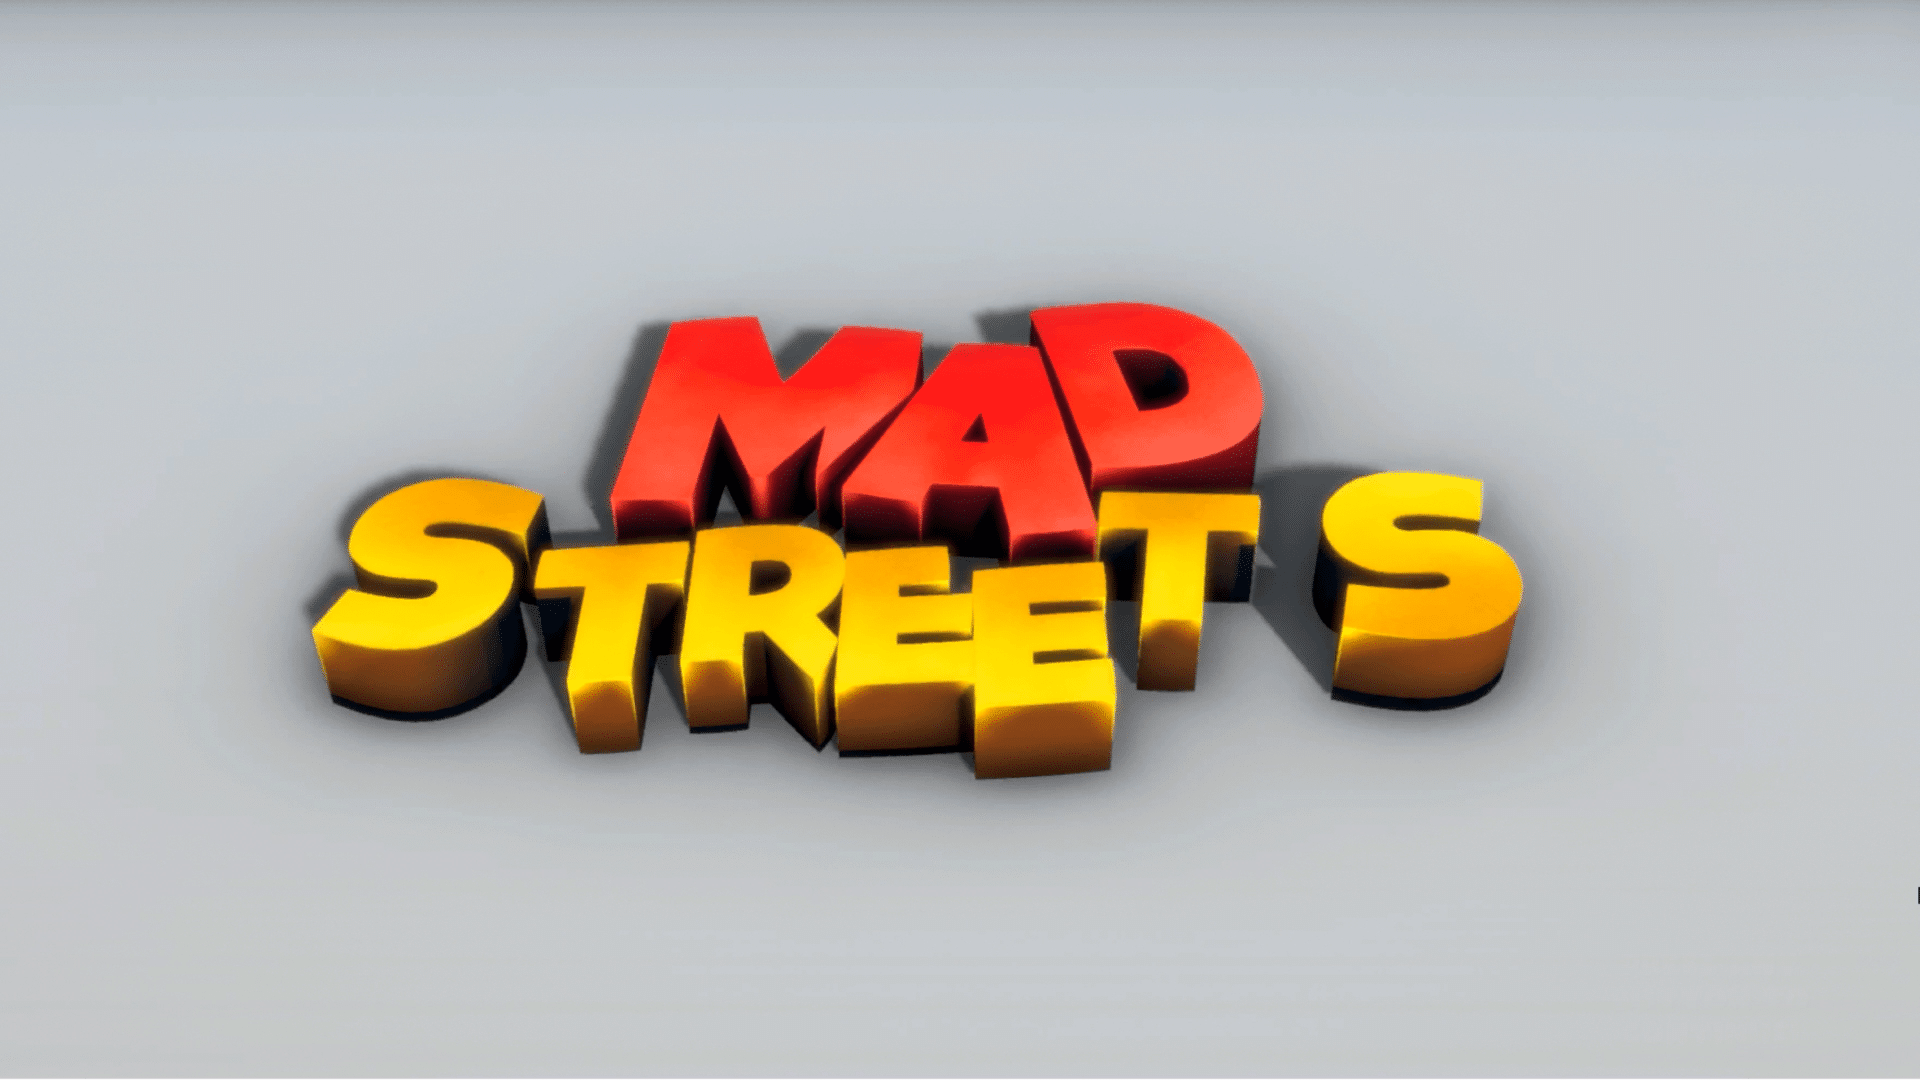 Mad Streets White Wallpaper